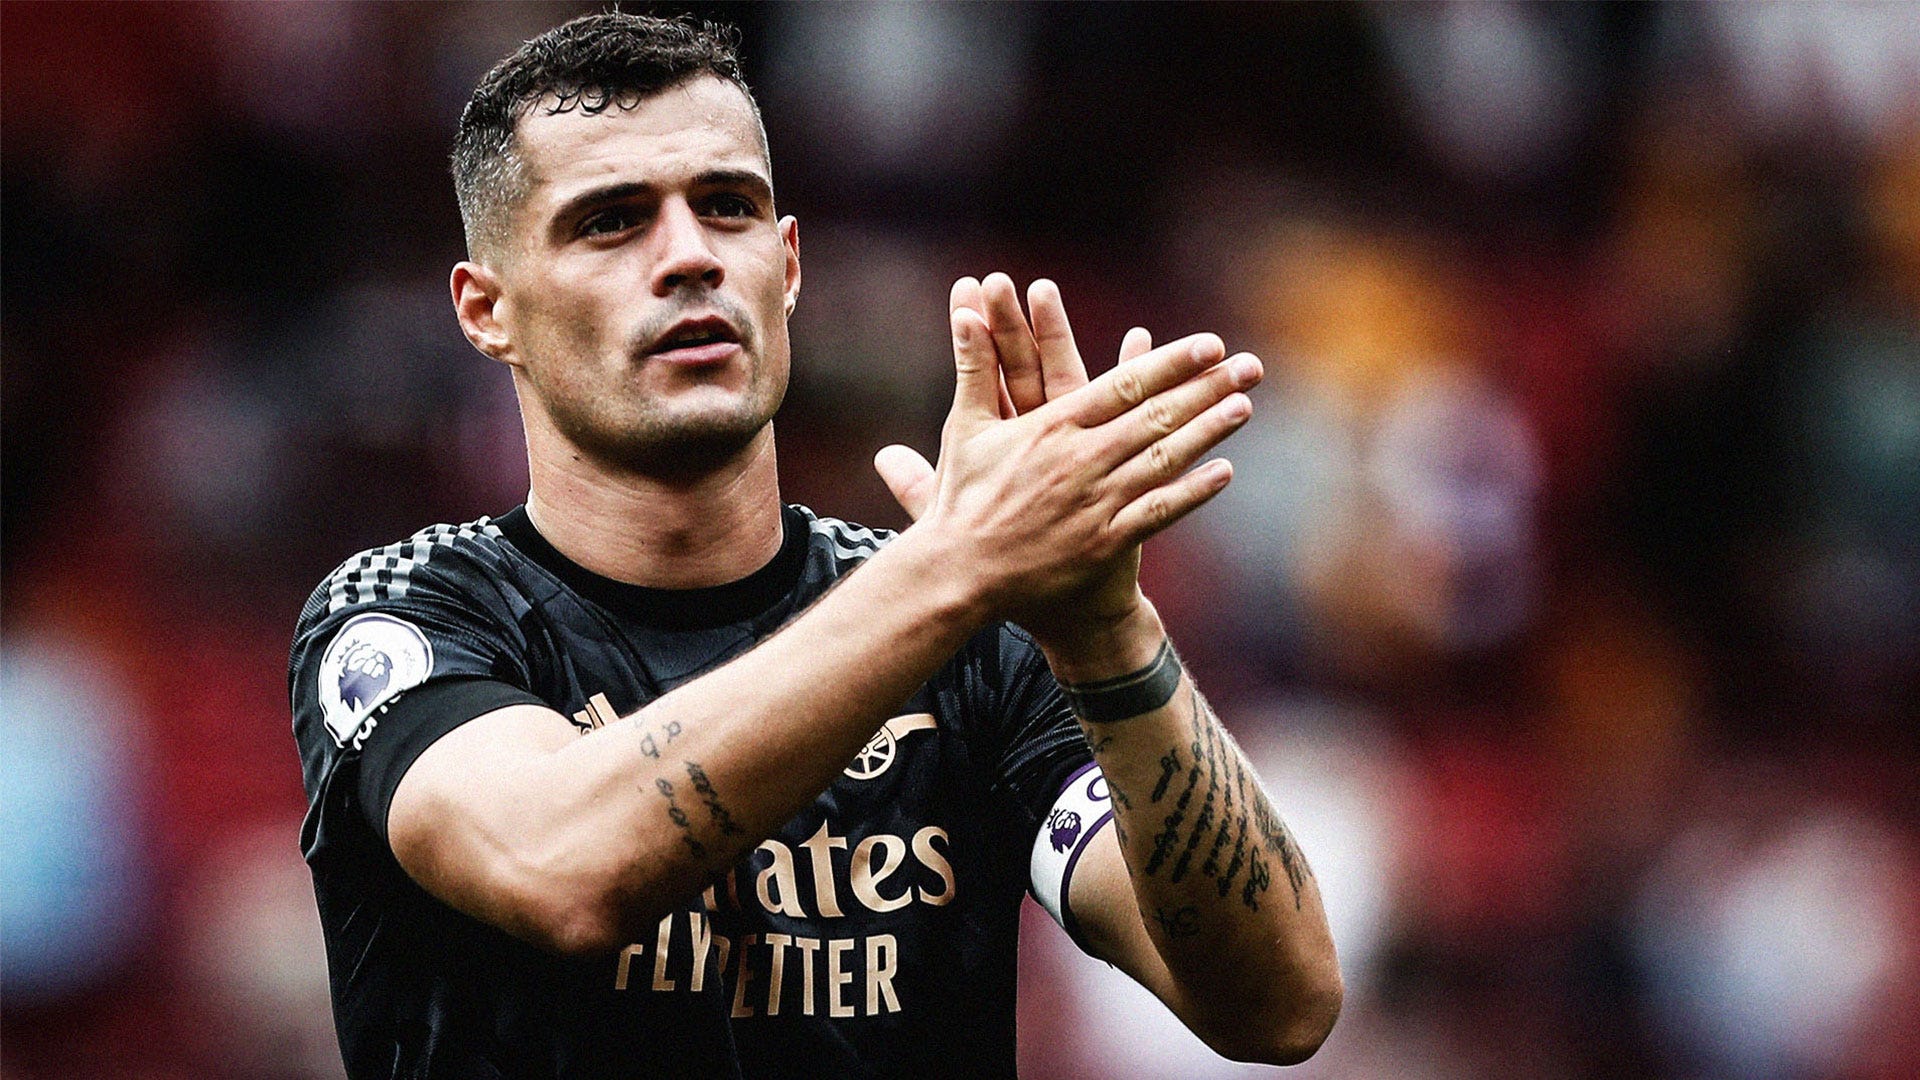 Xhaka Does Really Well When Playing Against the Team Leverkusen